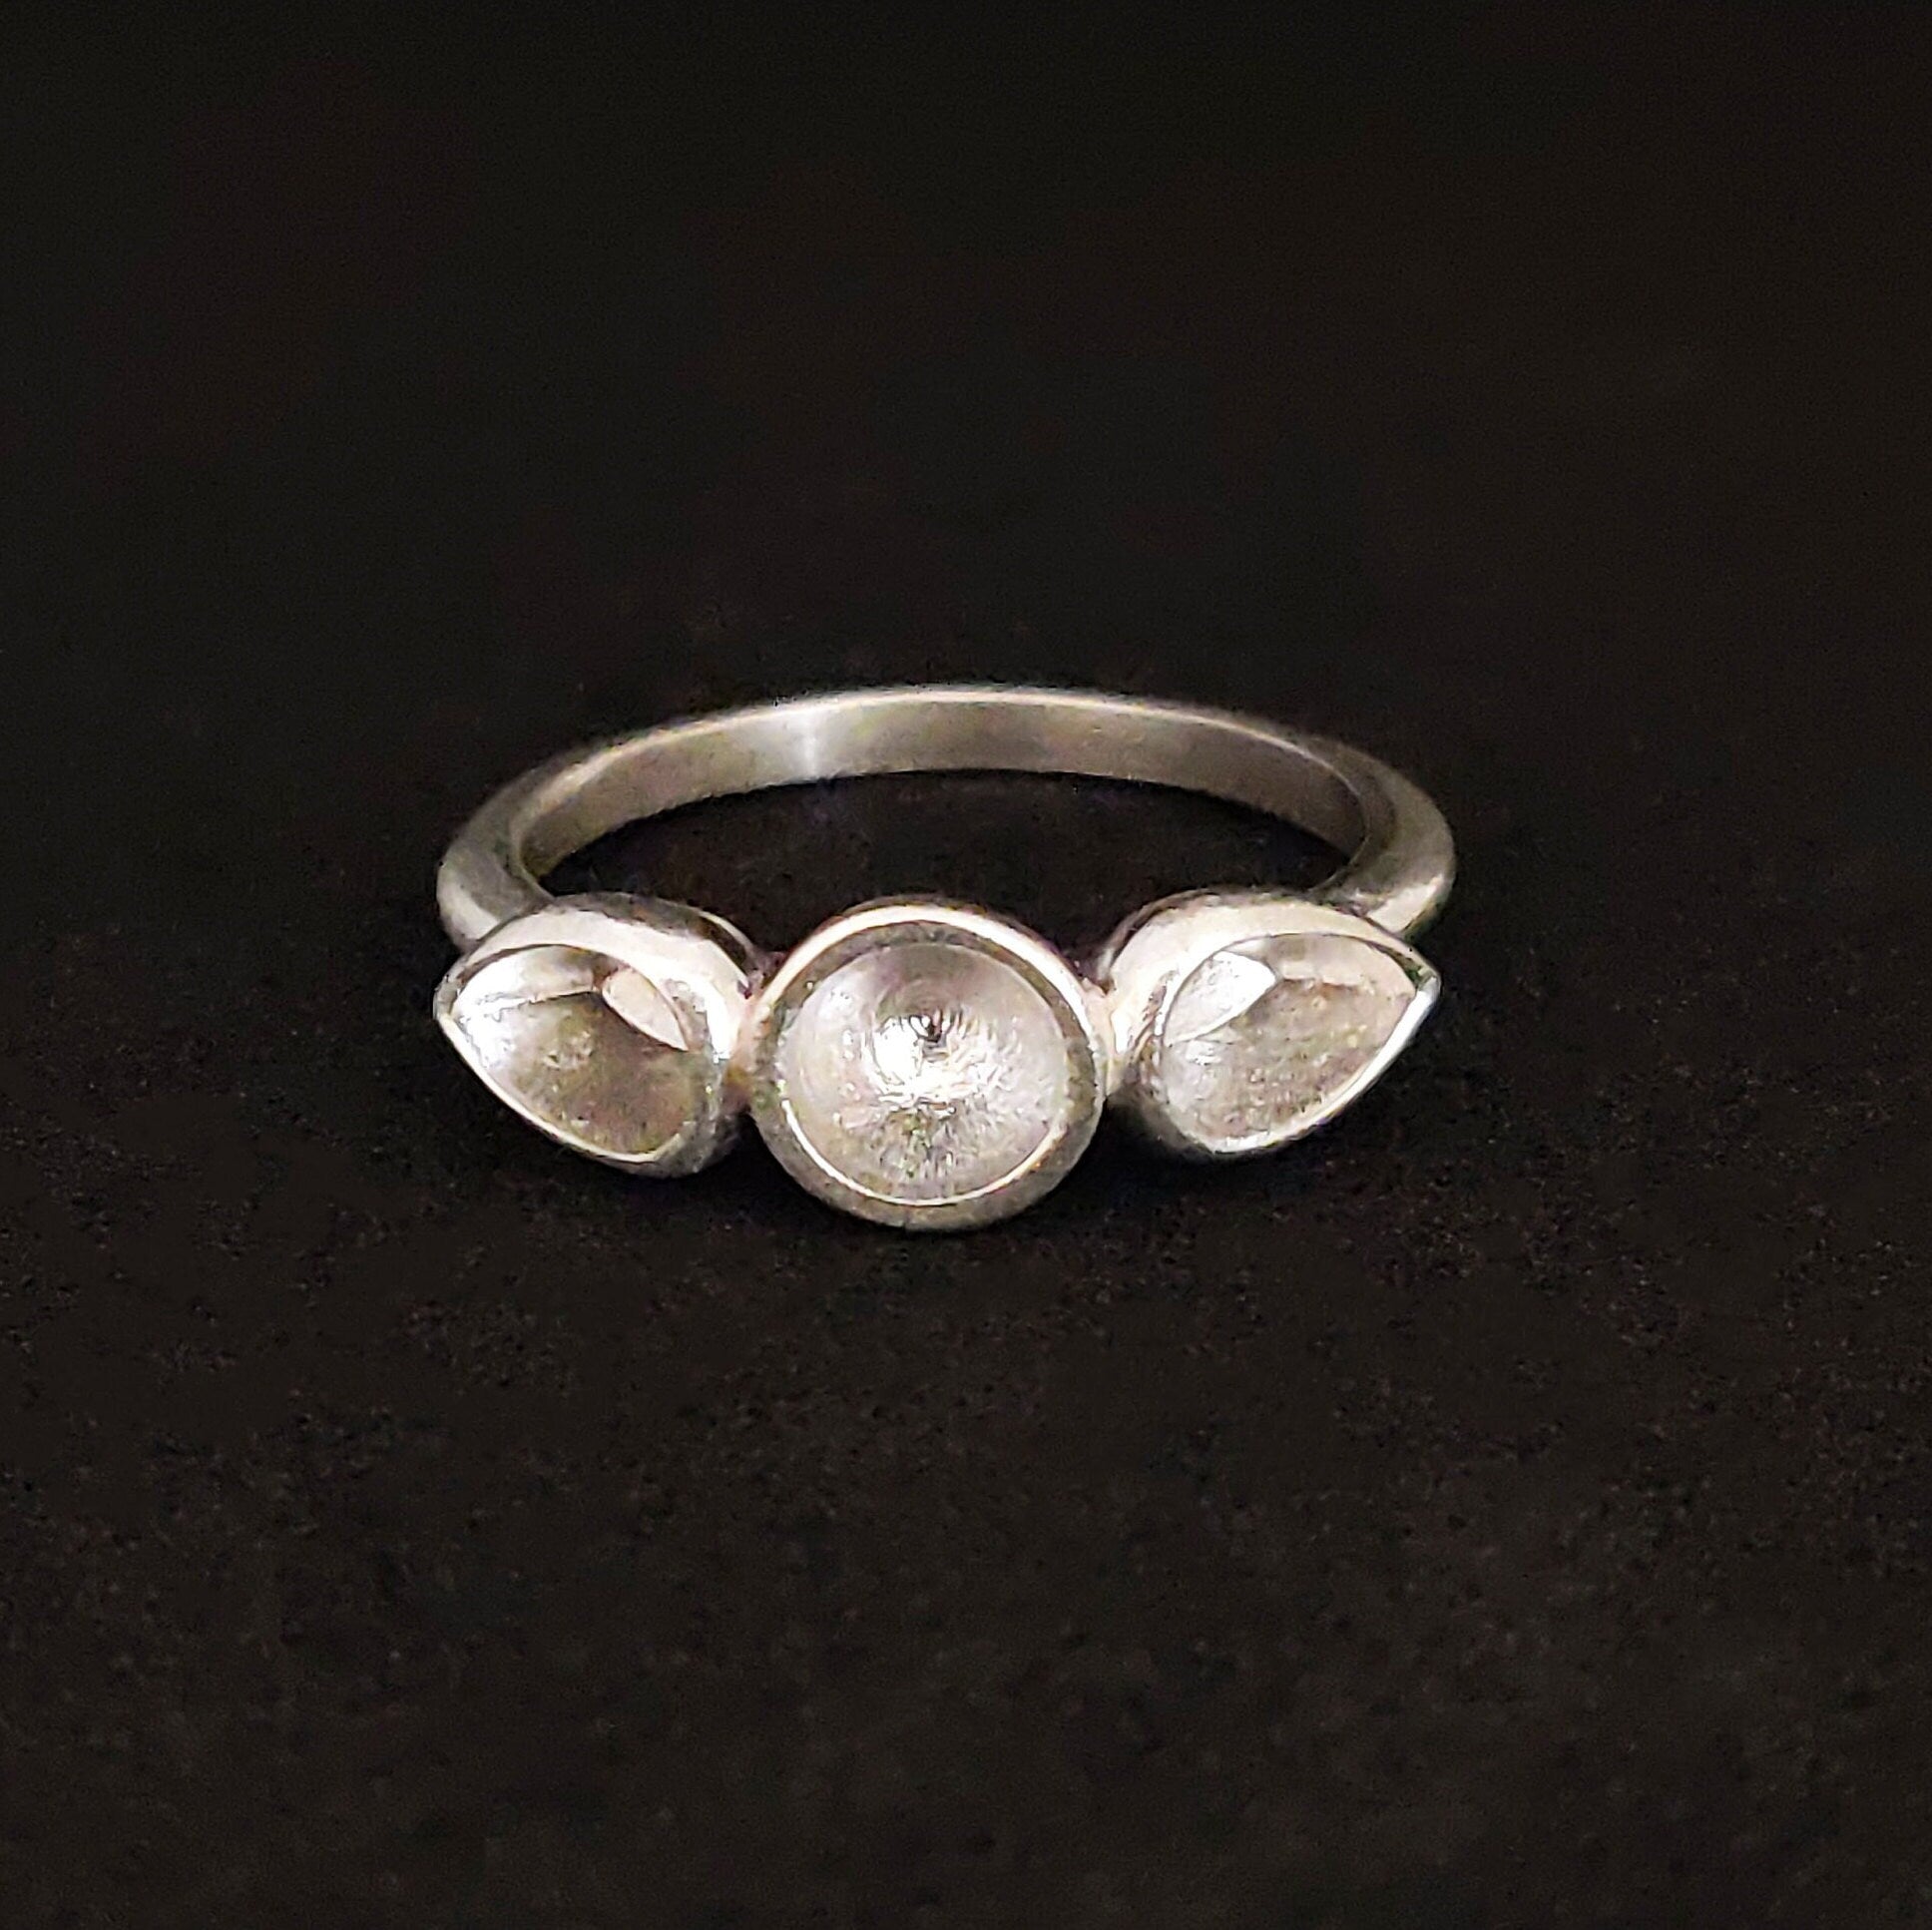 3 stone Silver Cup Bezel Ring Setting. Round Sealed Cup Rubover Bezel. Pear, Round, Pear Setting. 9ct Yellow Gold Cup Bezel Stacking Ring.